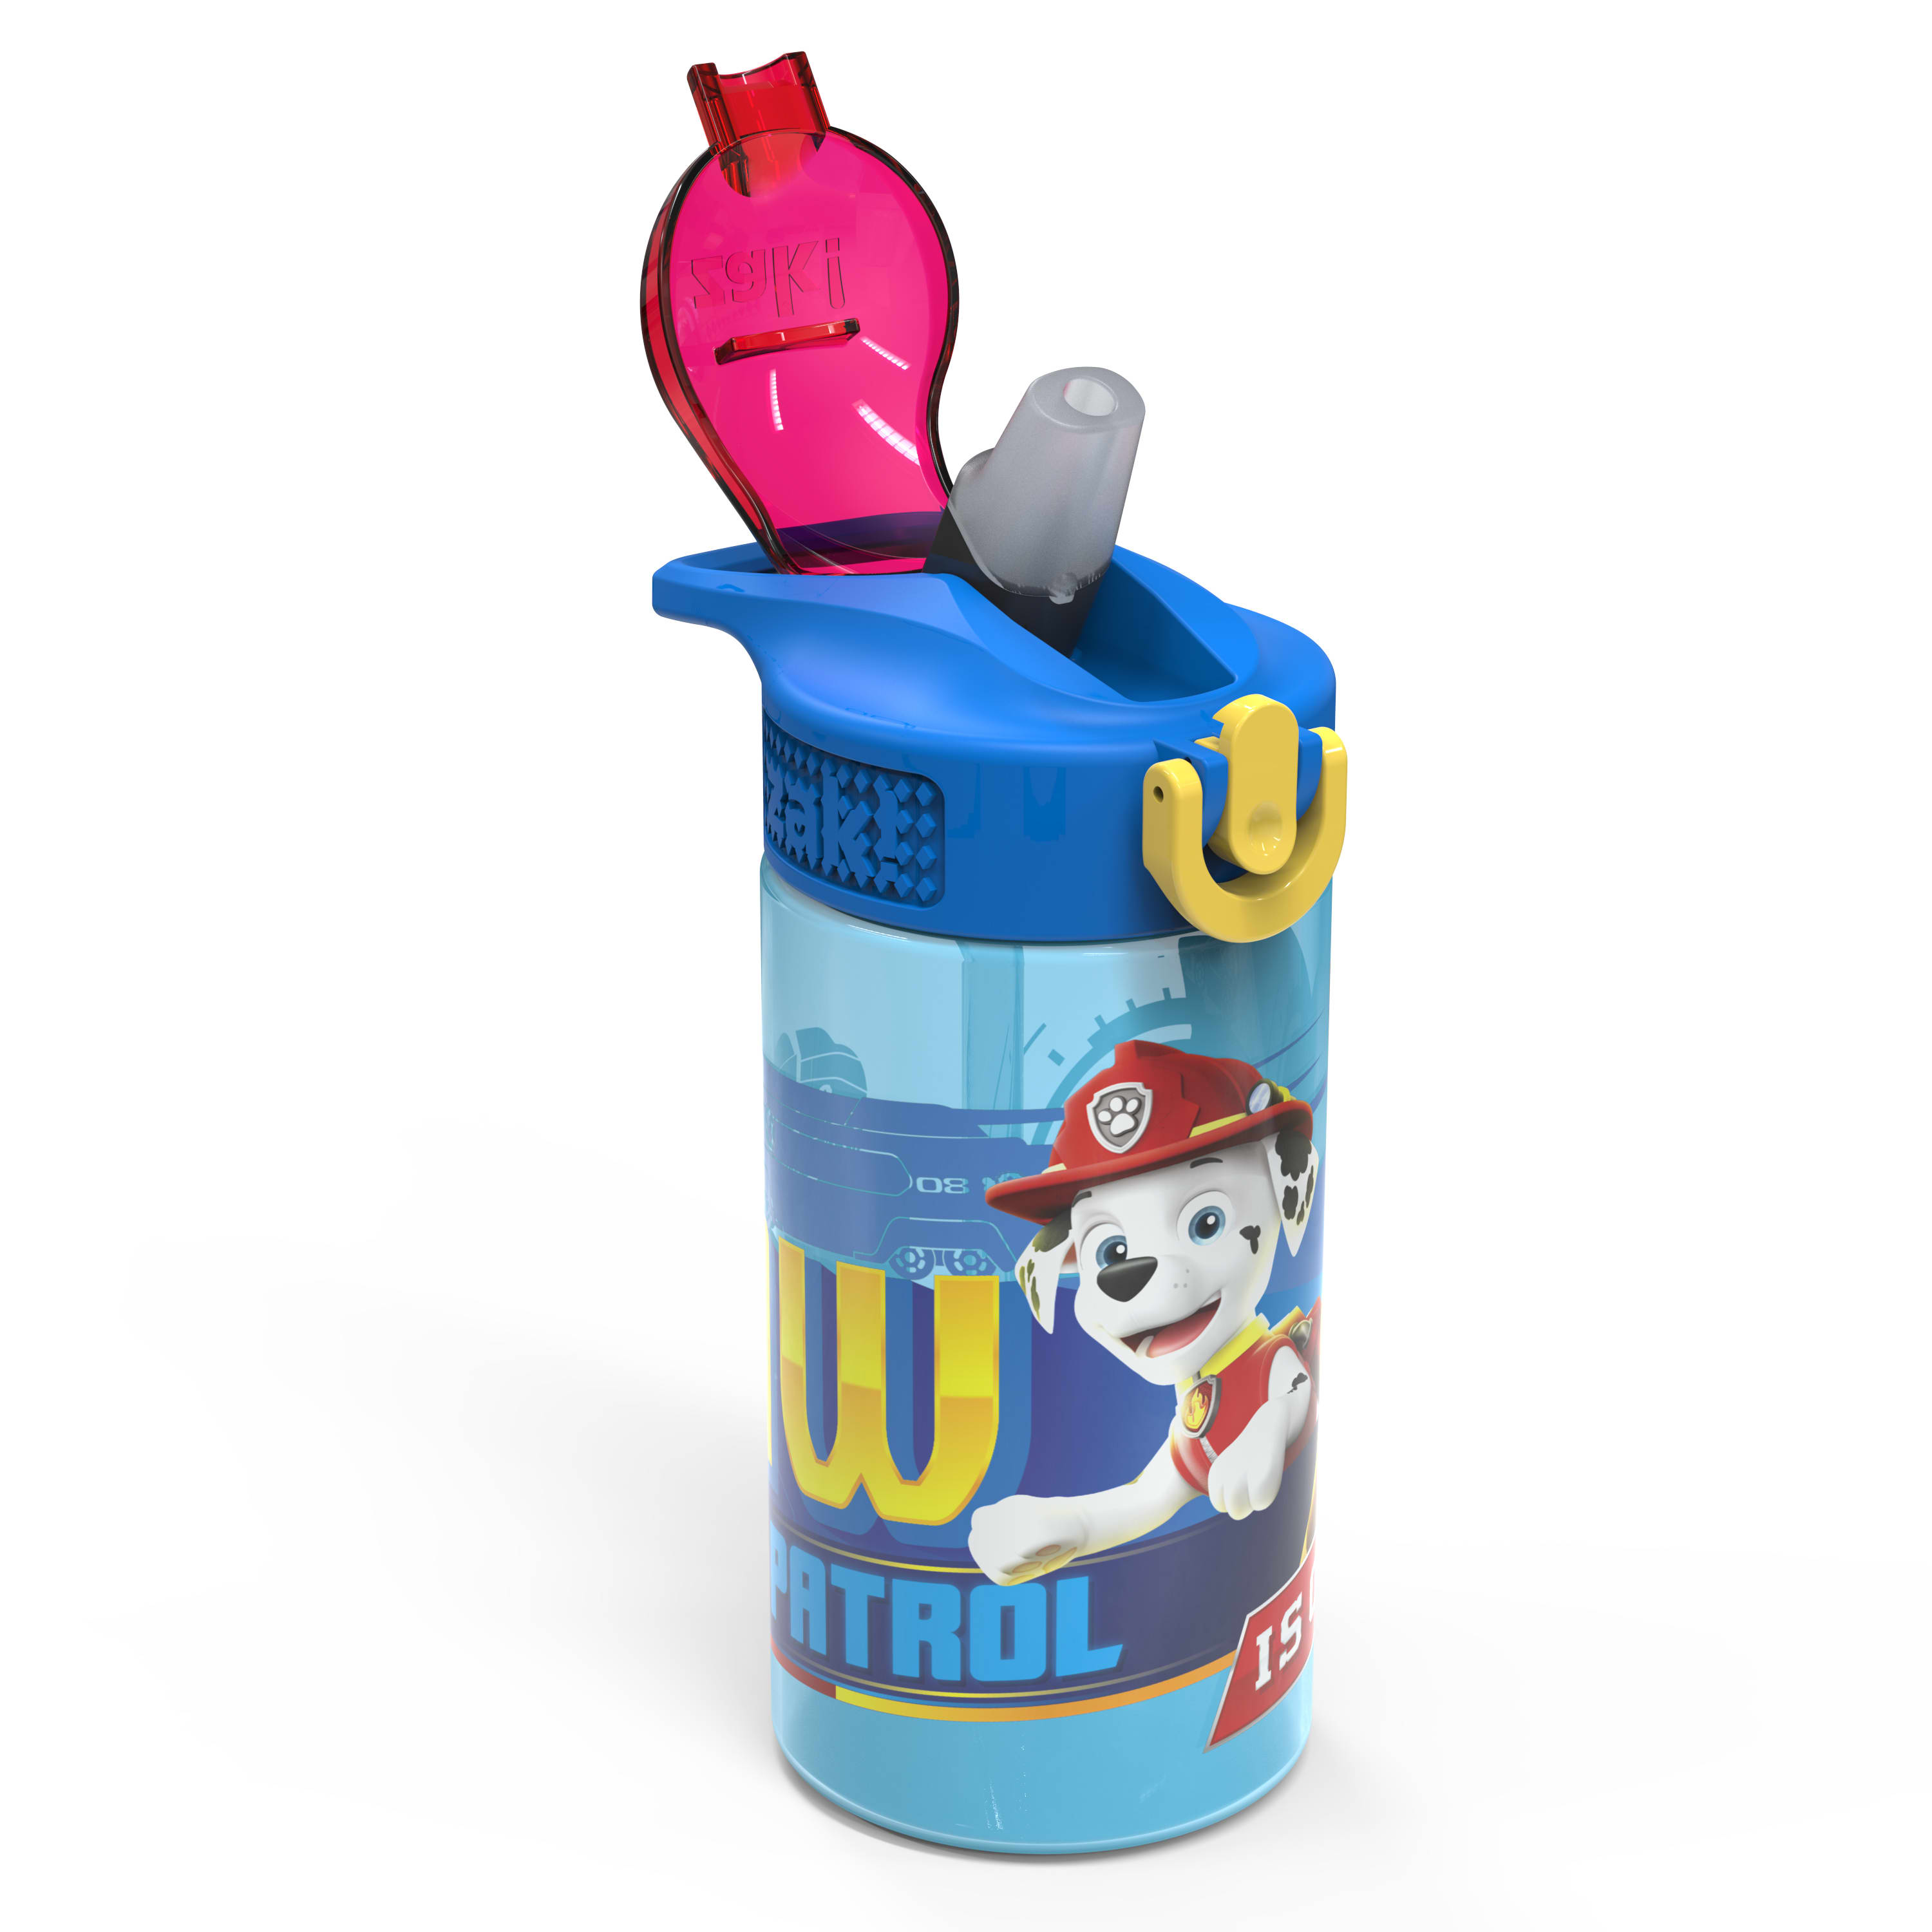 Zak Designs Paw Patrol 16 Ounce Reusable Plastic Water Bottle, Chase and Marshall - image 2 of 8